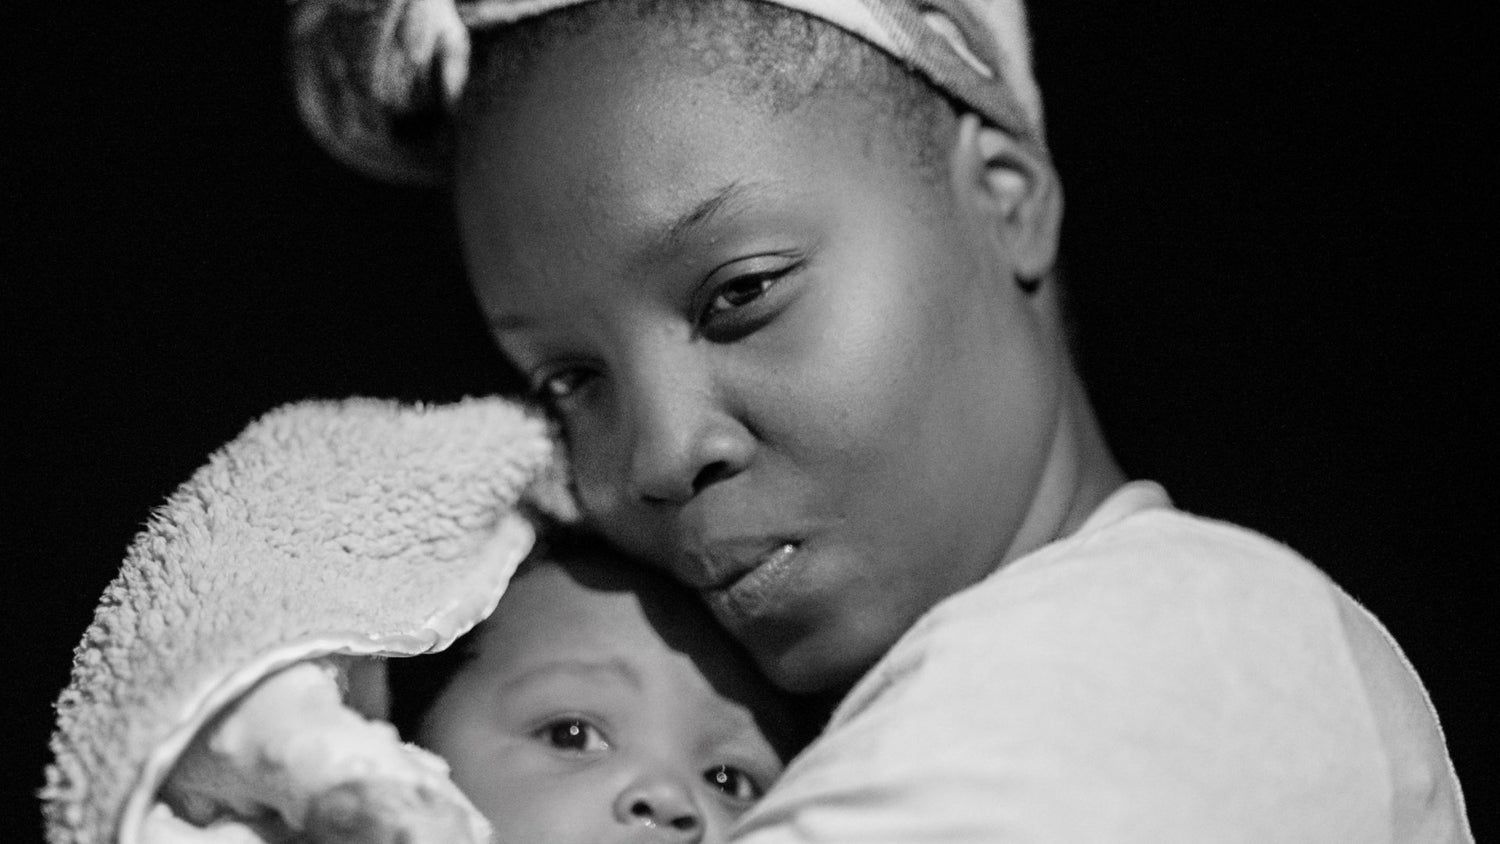 Afrocenchix postpartum hair loss black and white image of woman holding a baby